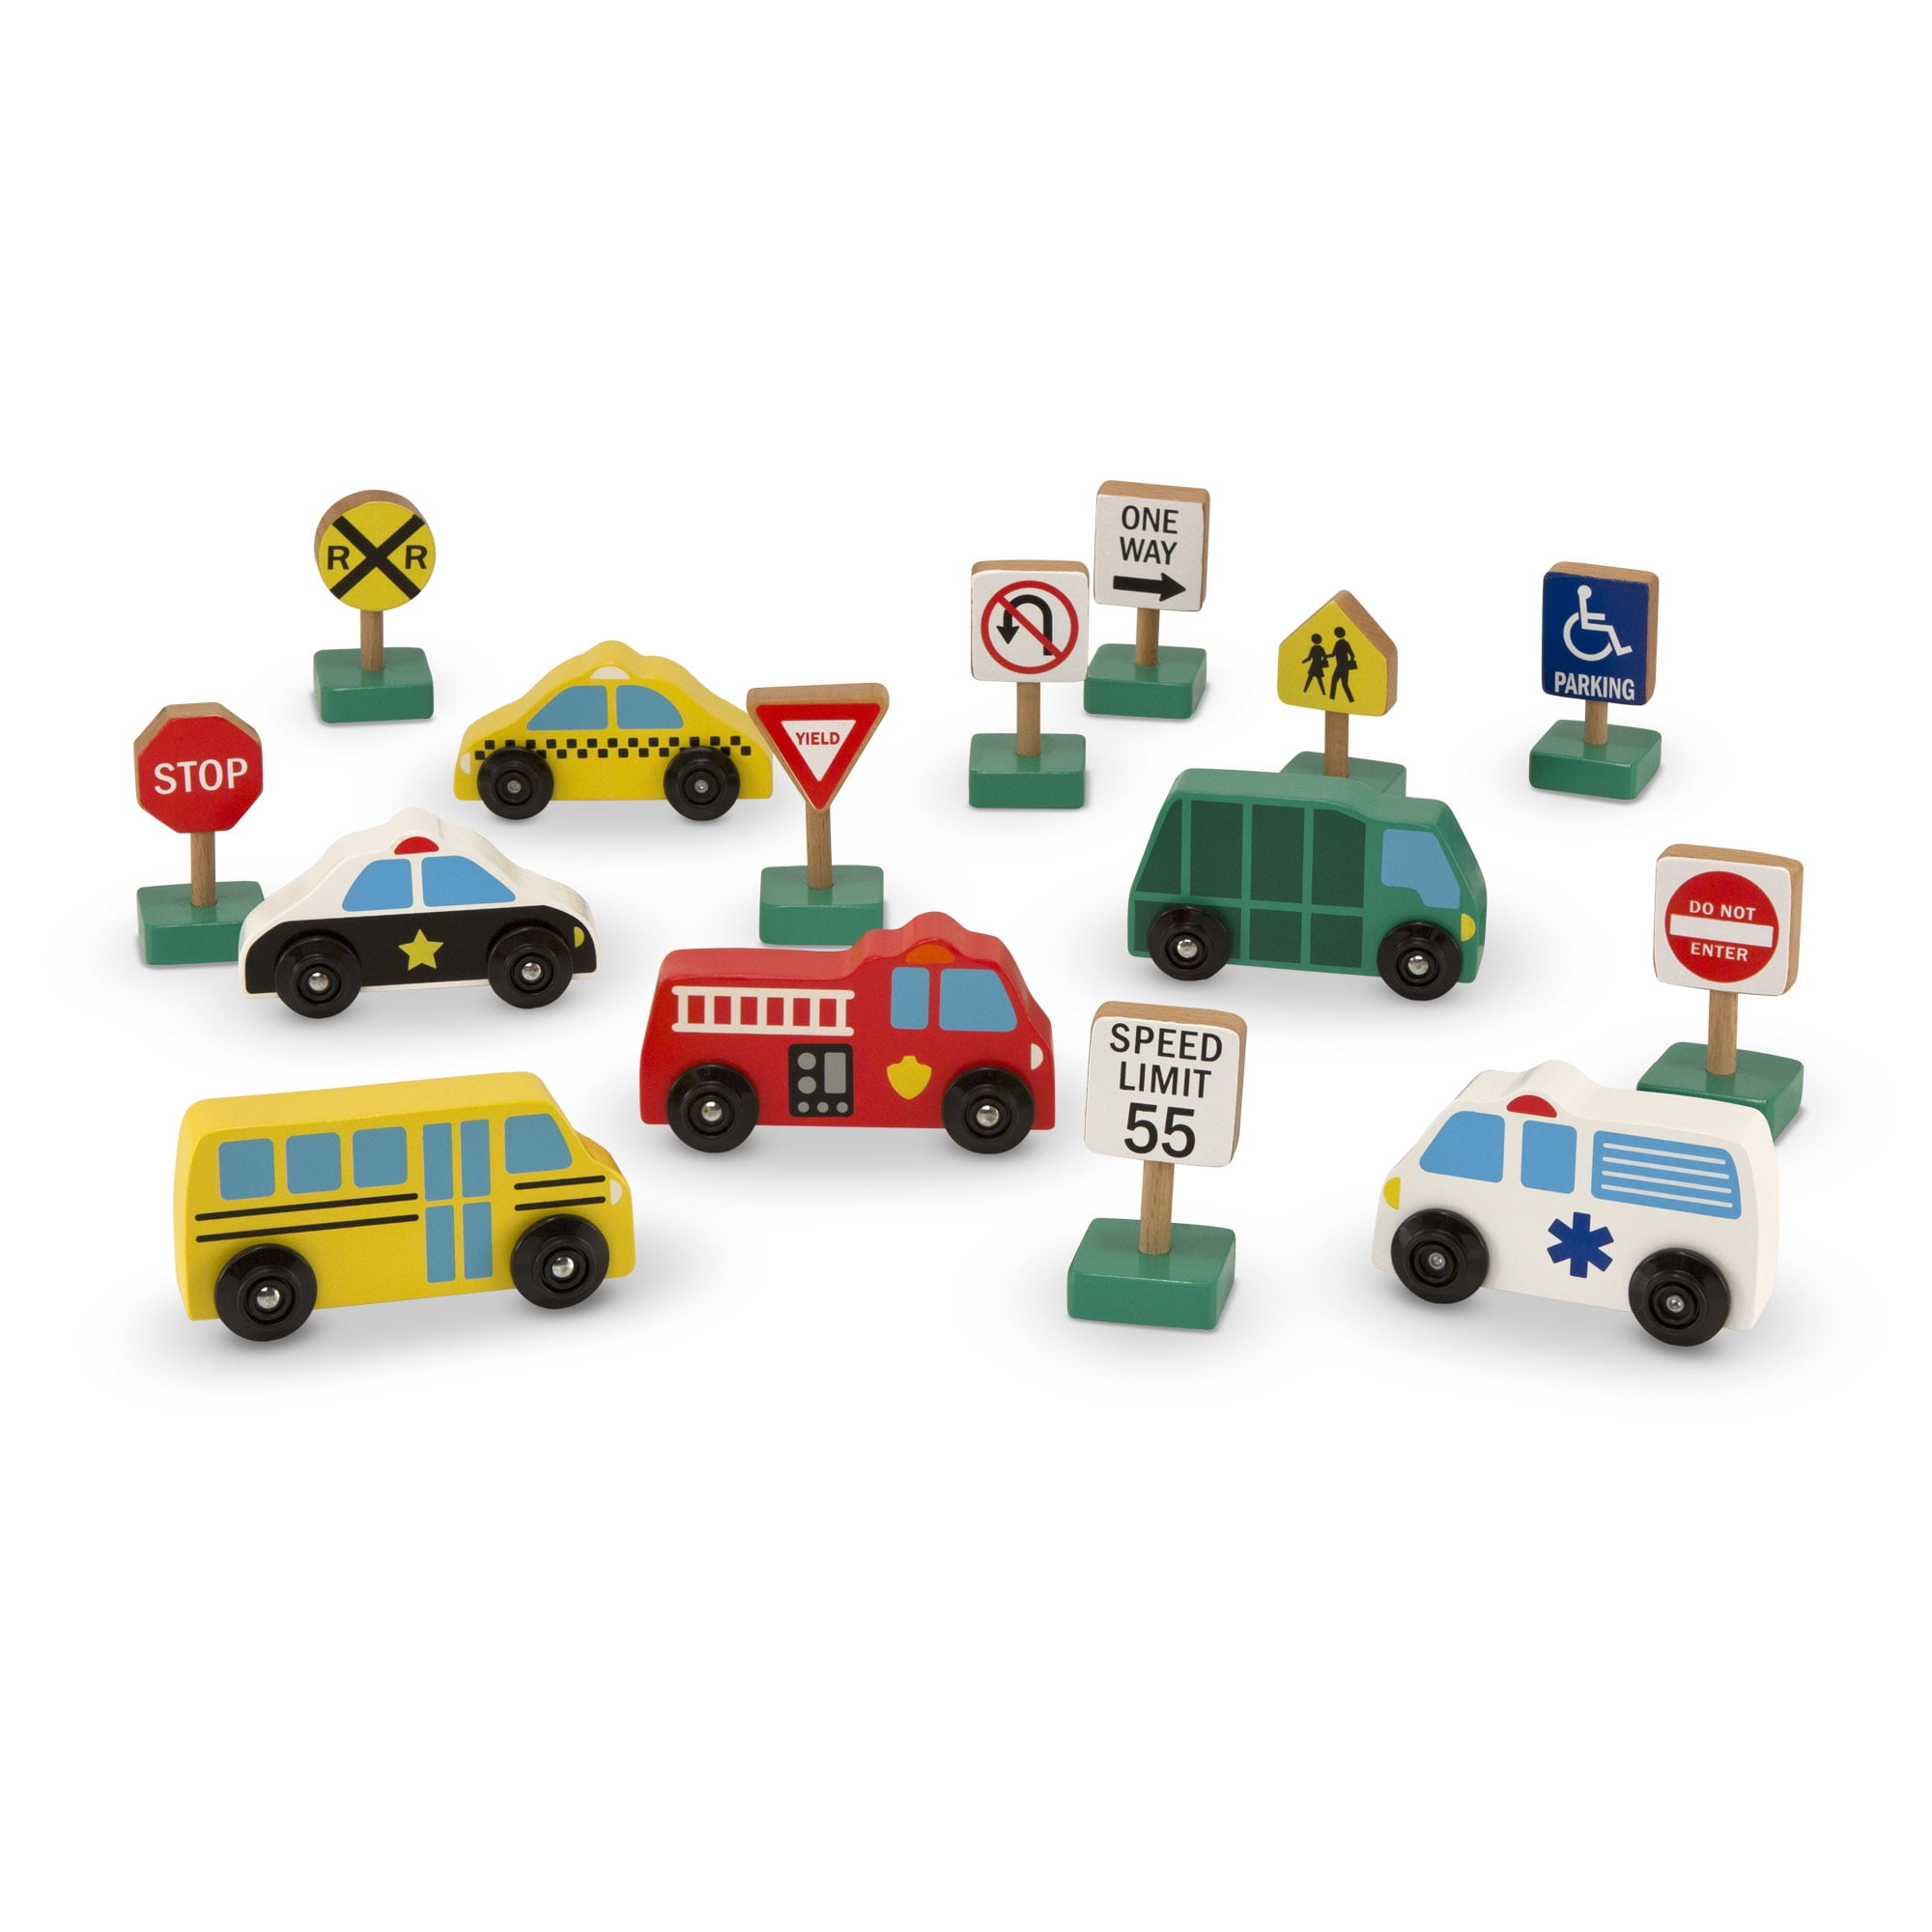 Road Parking Lot Stickers Car Bus Traffic Sign Guide for Children Car Toy 